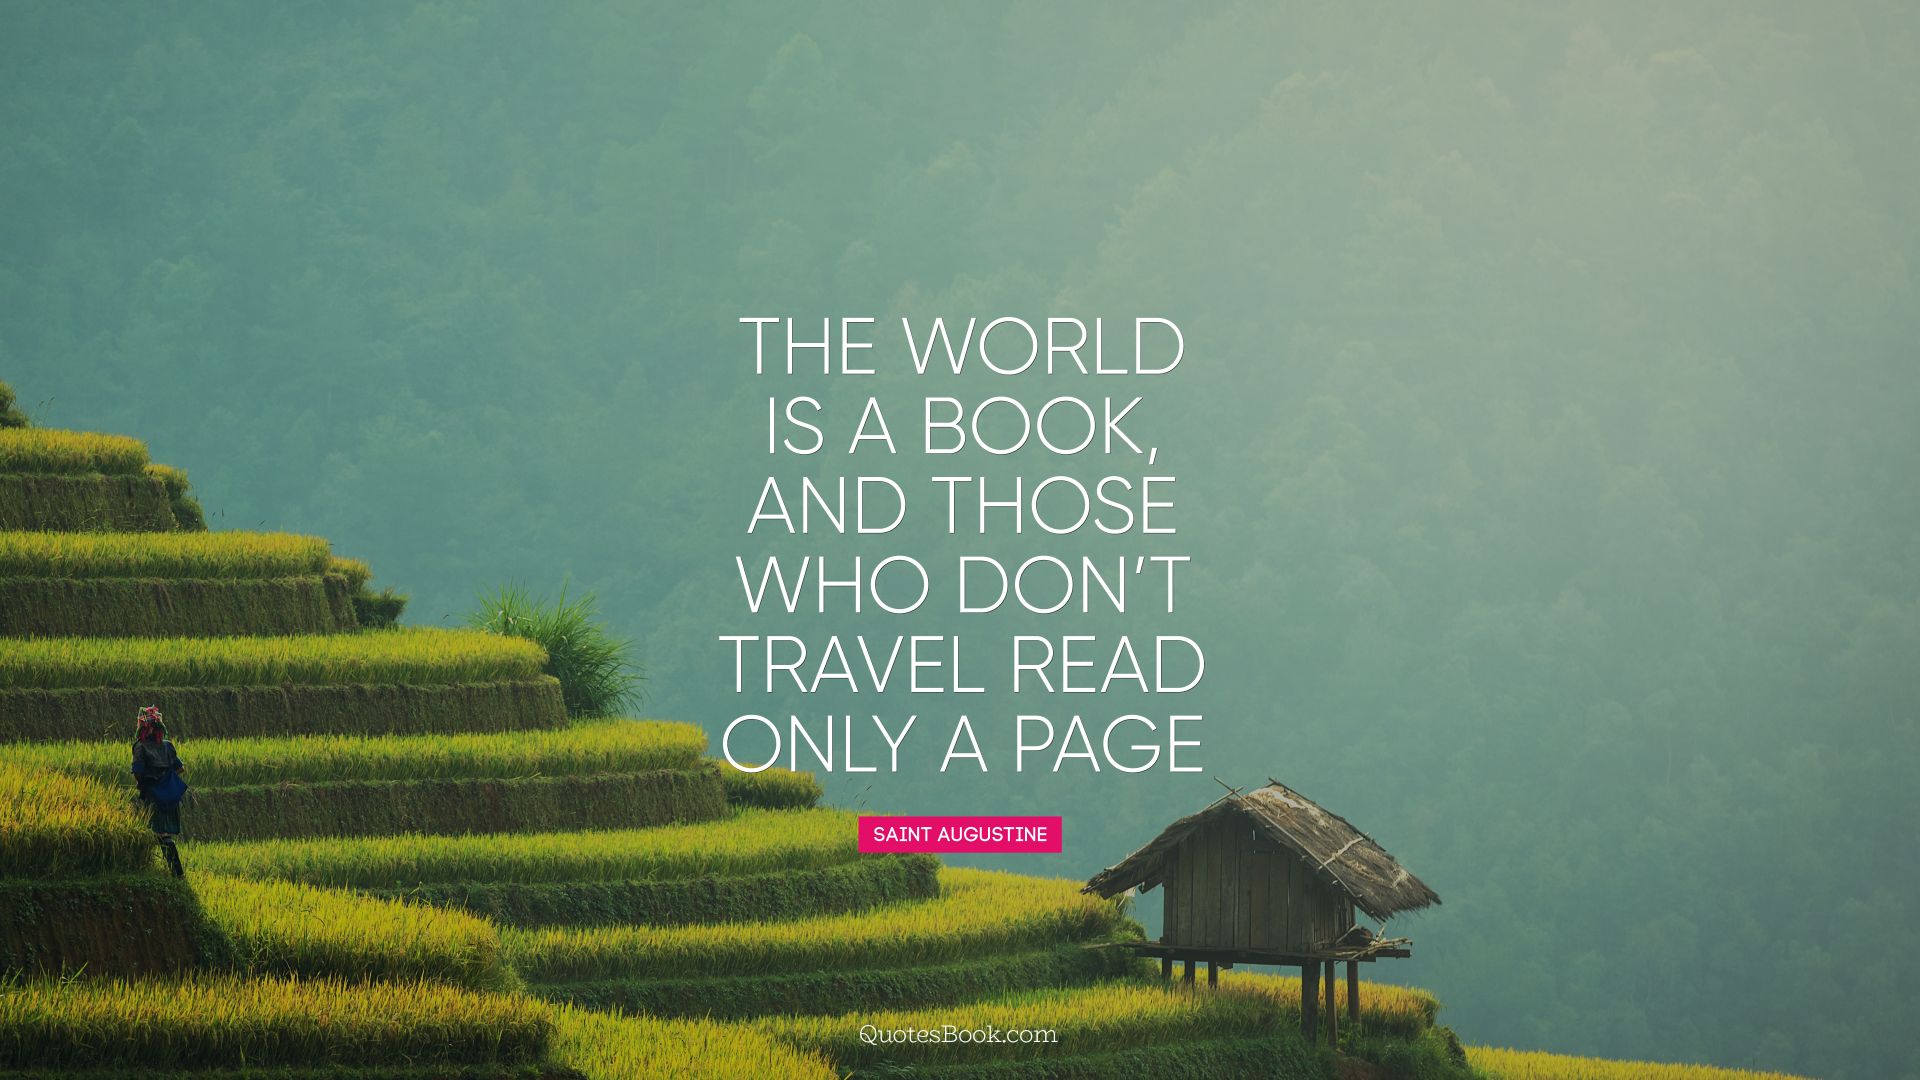 The world is a book, and those who do not travel read only a page. - Quote by Saint Augustine